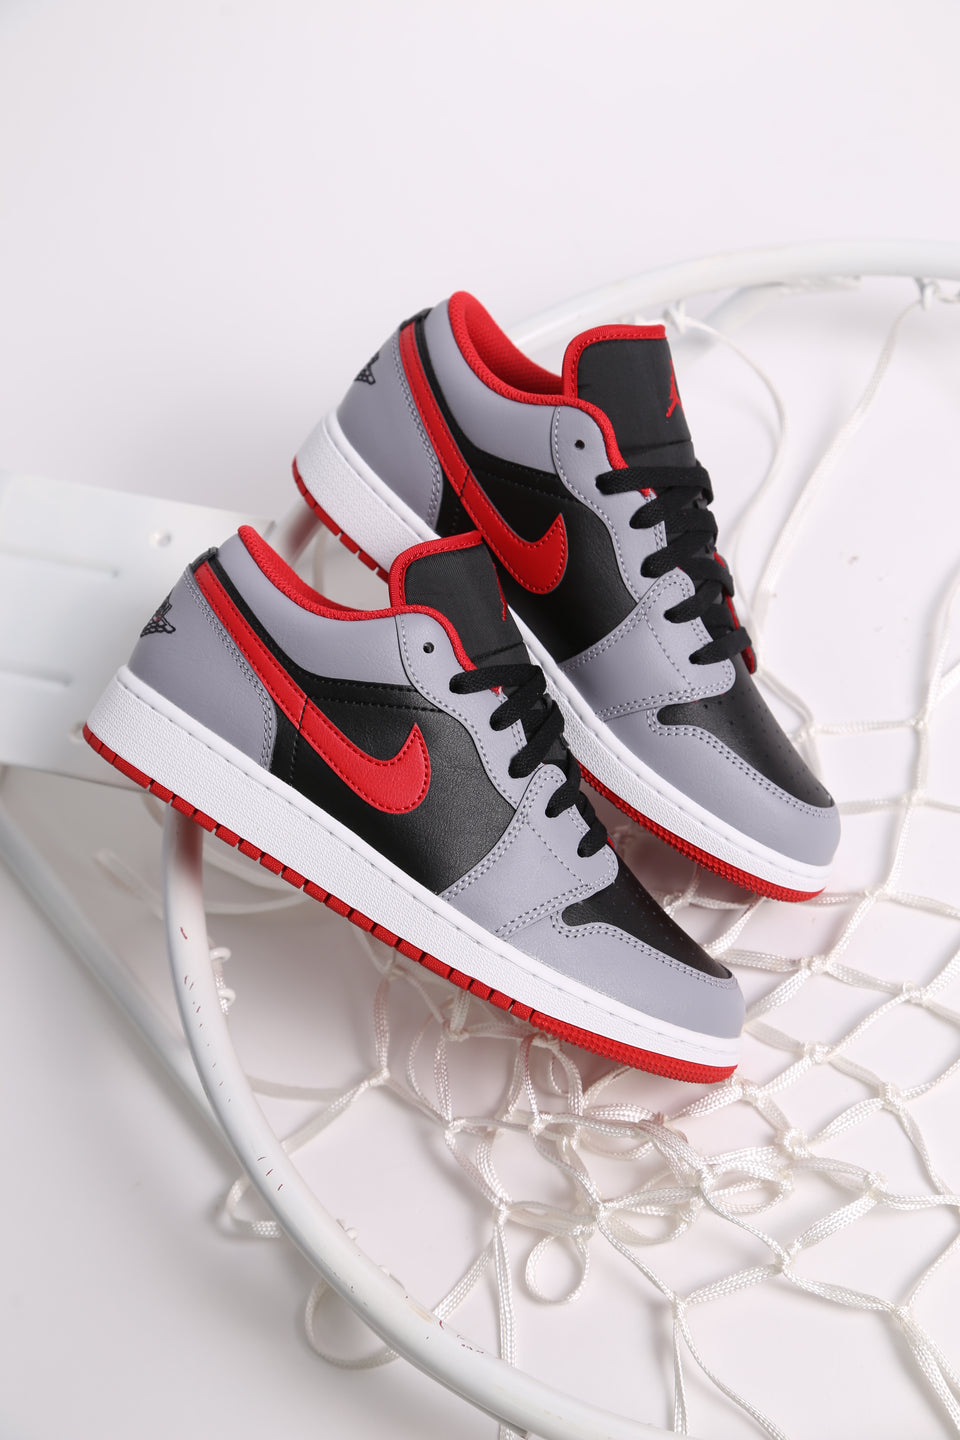 Air Jordan 1 Low GS (YOUTH) - Cement Fire Red